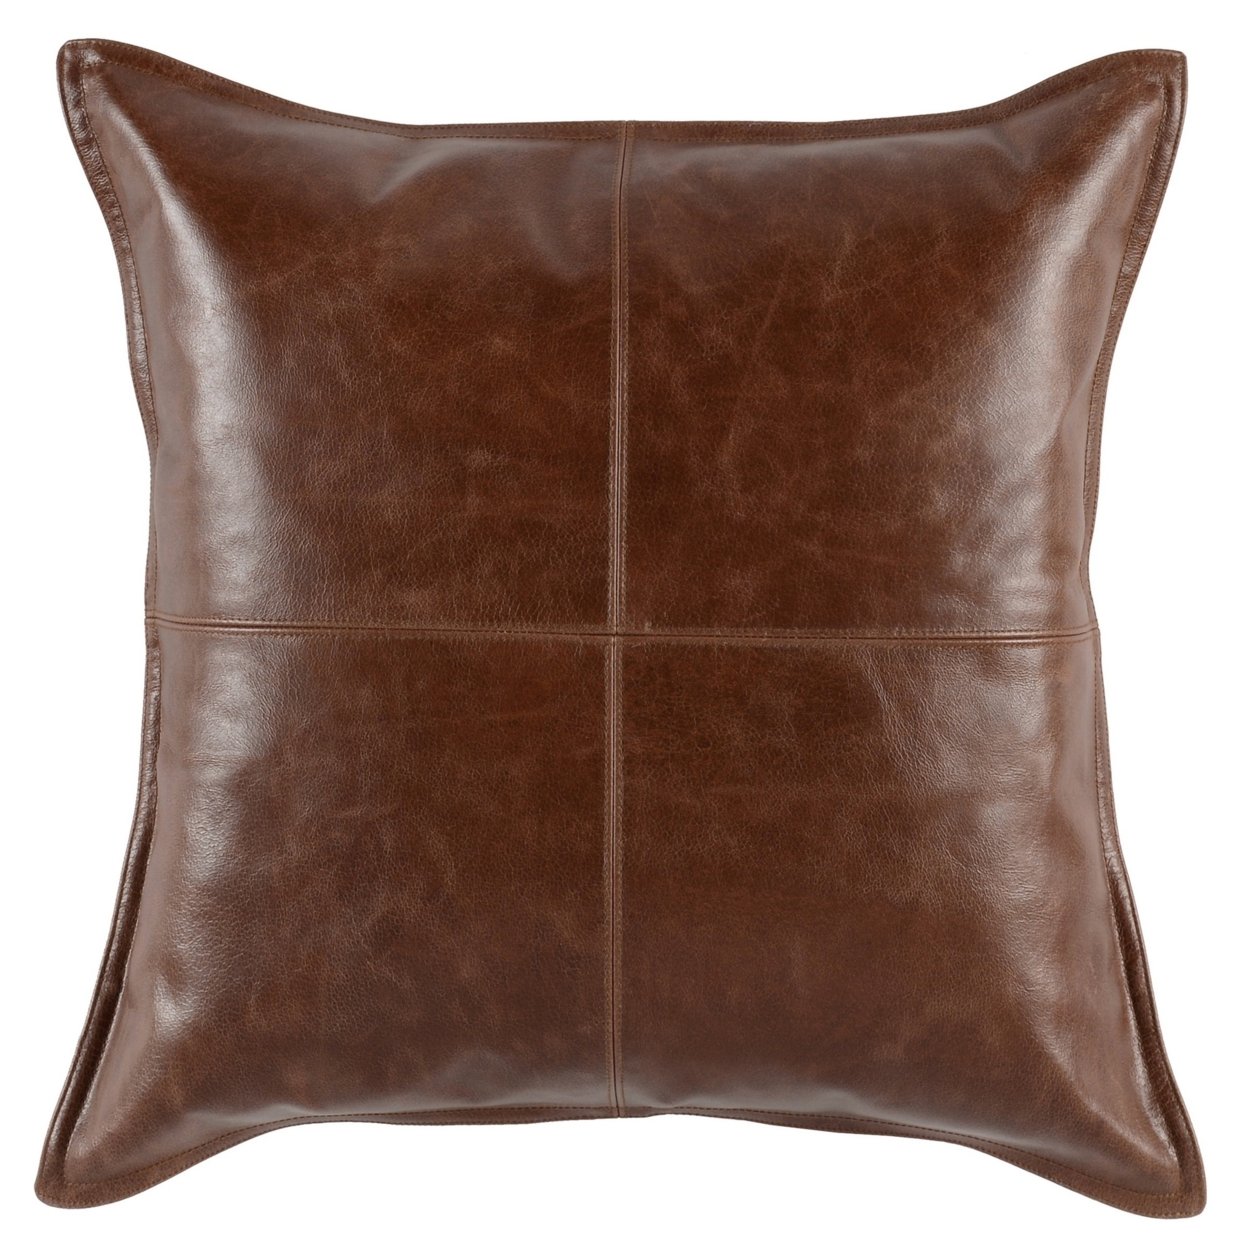 Norm 22 Inch Square Accent Throw Pillow, Authentic Distressed Brown Leather- Saltoro Sherpi